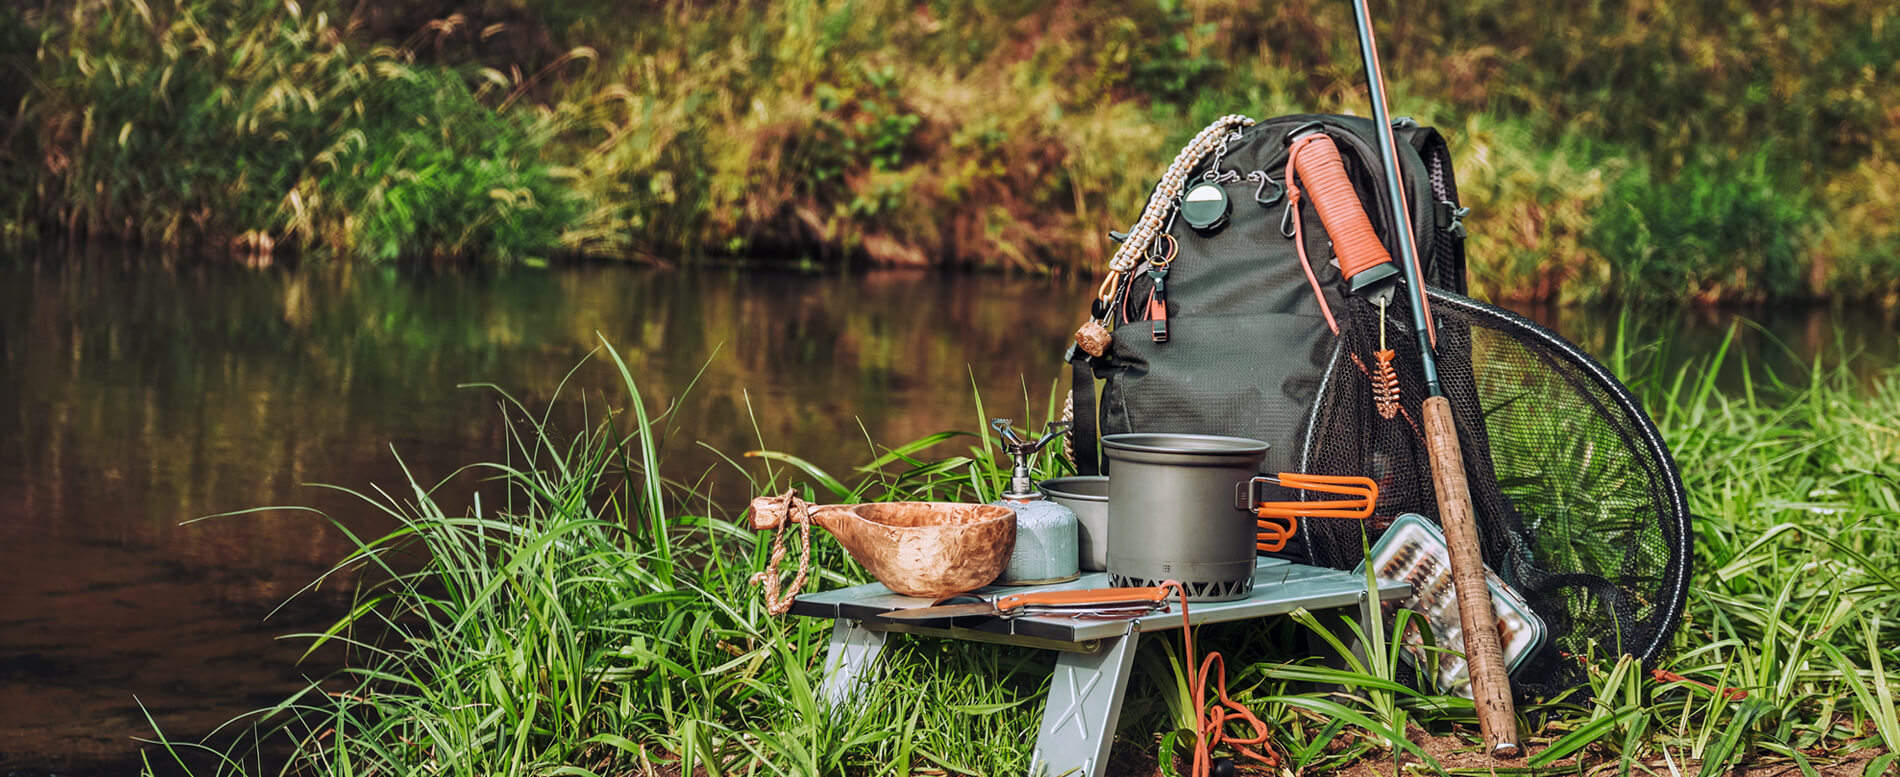 The Trout Spot Wading Backpack with Chest Bag